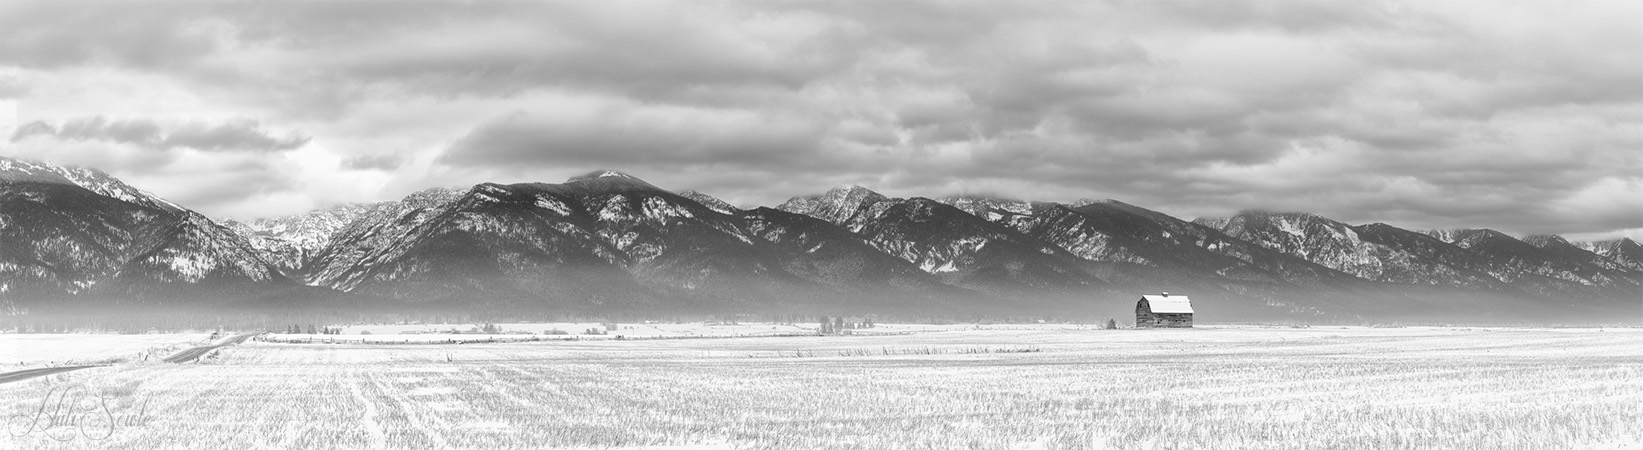 2016_01_12_Montana-10111-PanoBW-Edit1000.jpg - A wider view of the barn and the mountains.